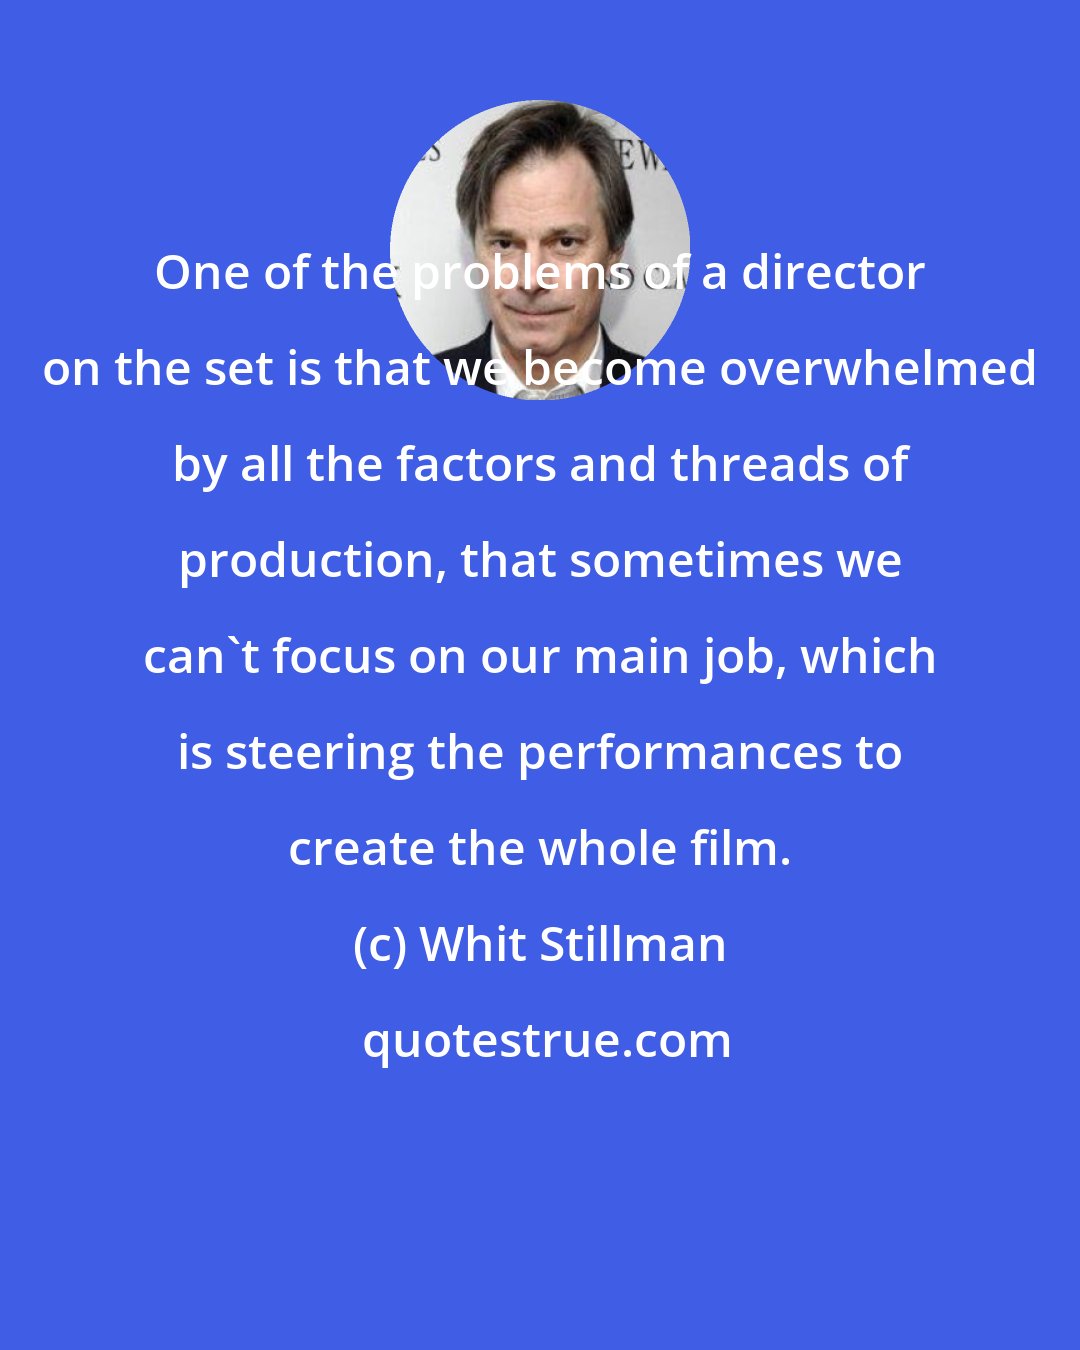 Whit Stillman: One of the problems of a director on the set is that we become overwhelmed by all the factors and threads of production, that sometimes we can't focus on our main job, which is steering the performances to create the whole film.